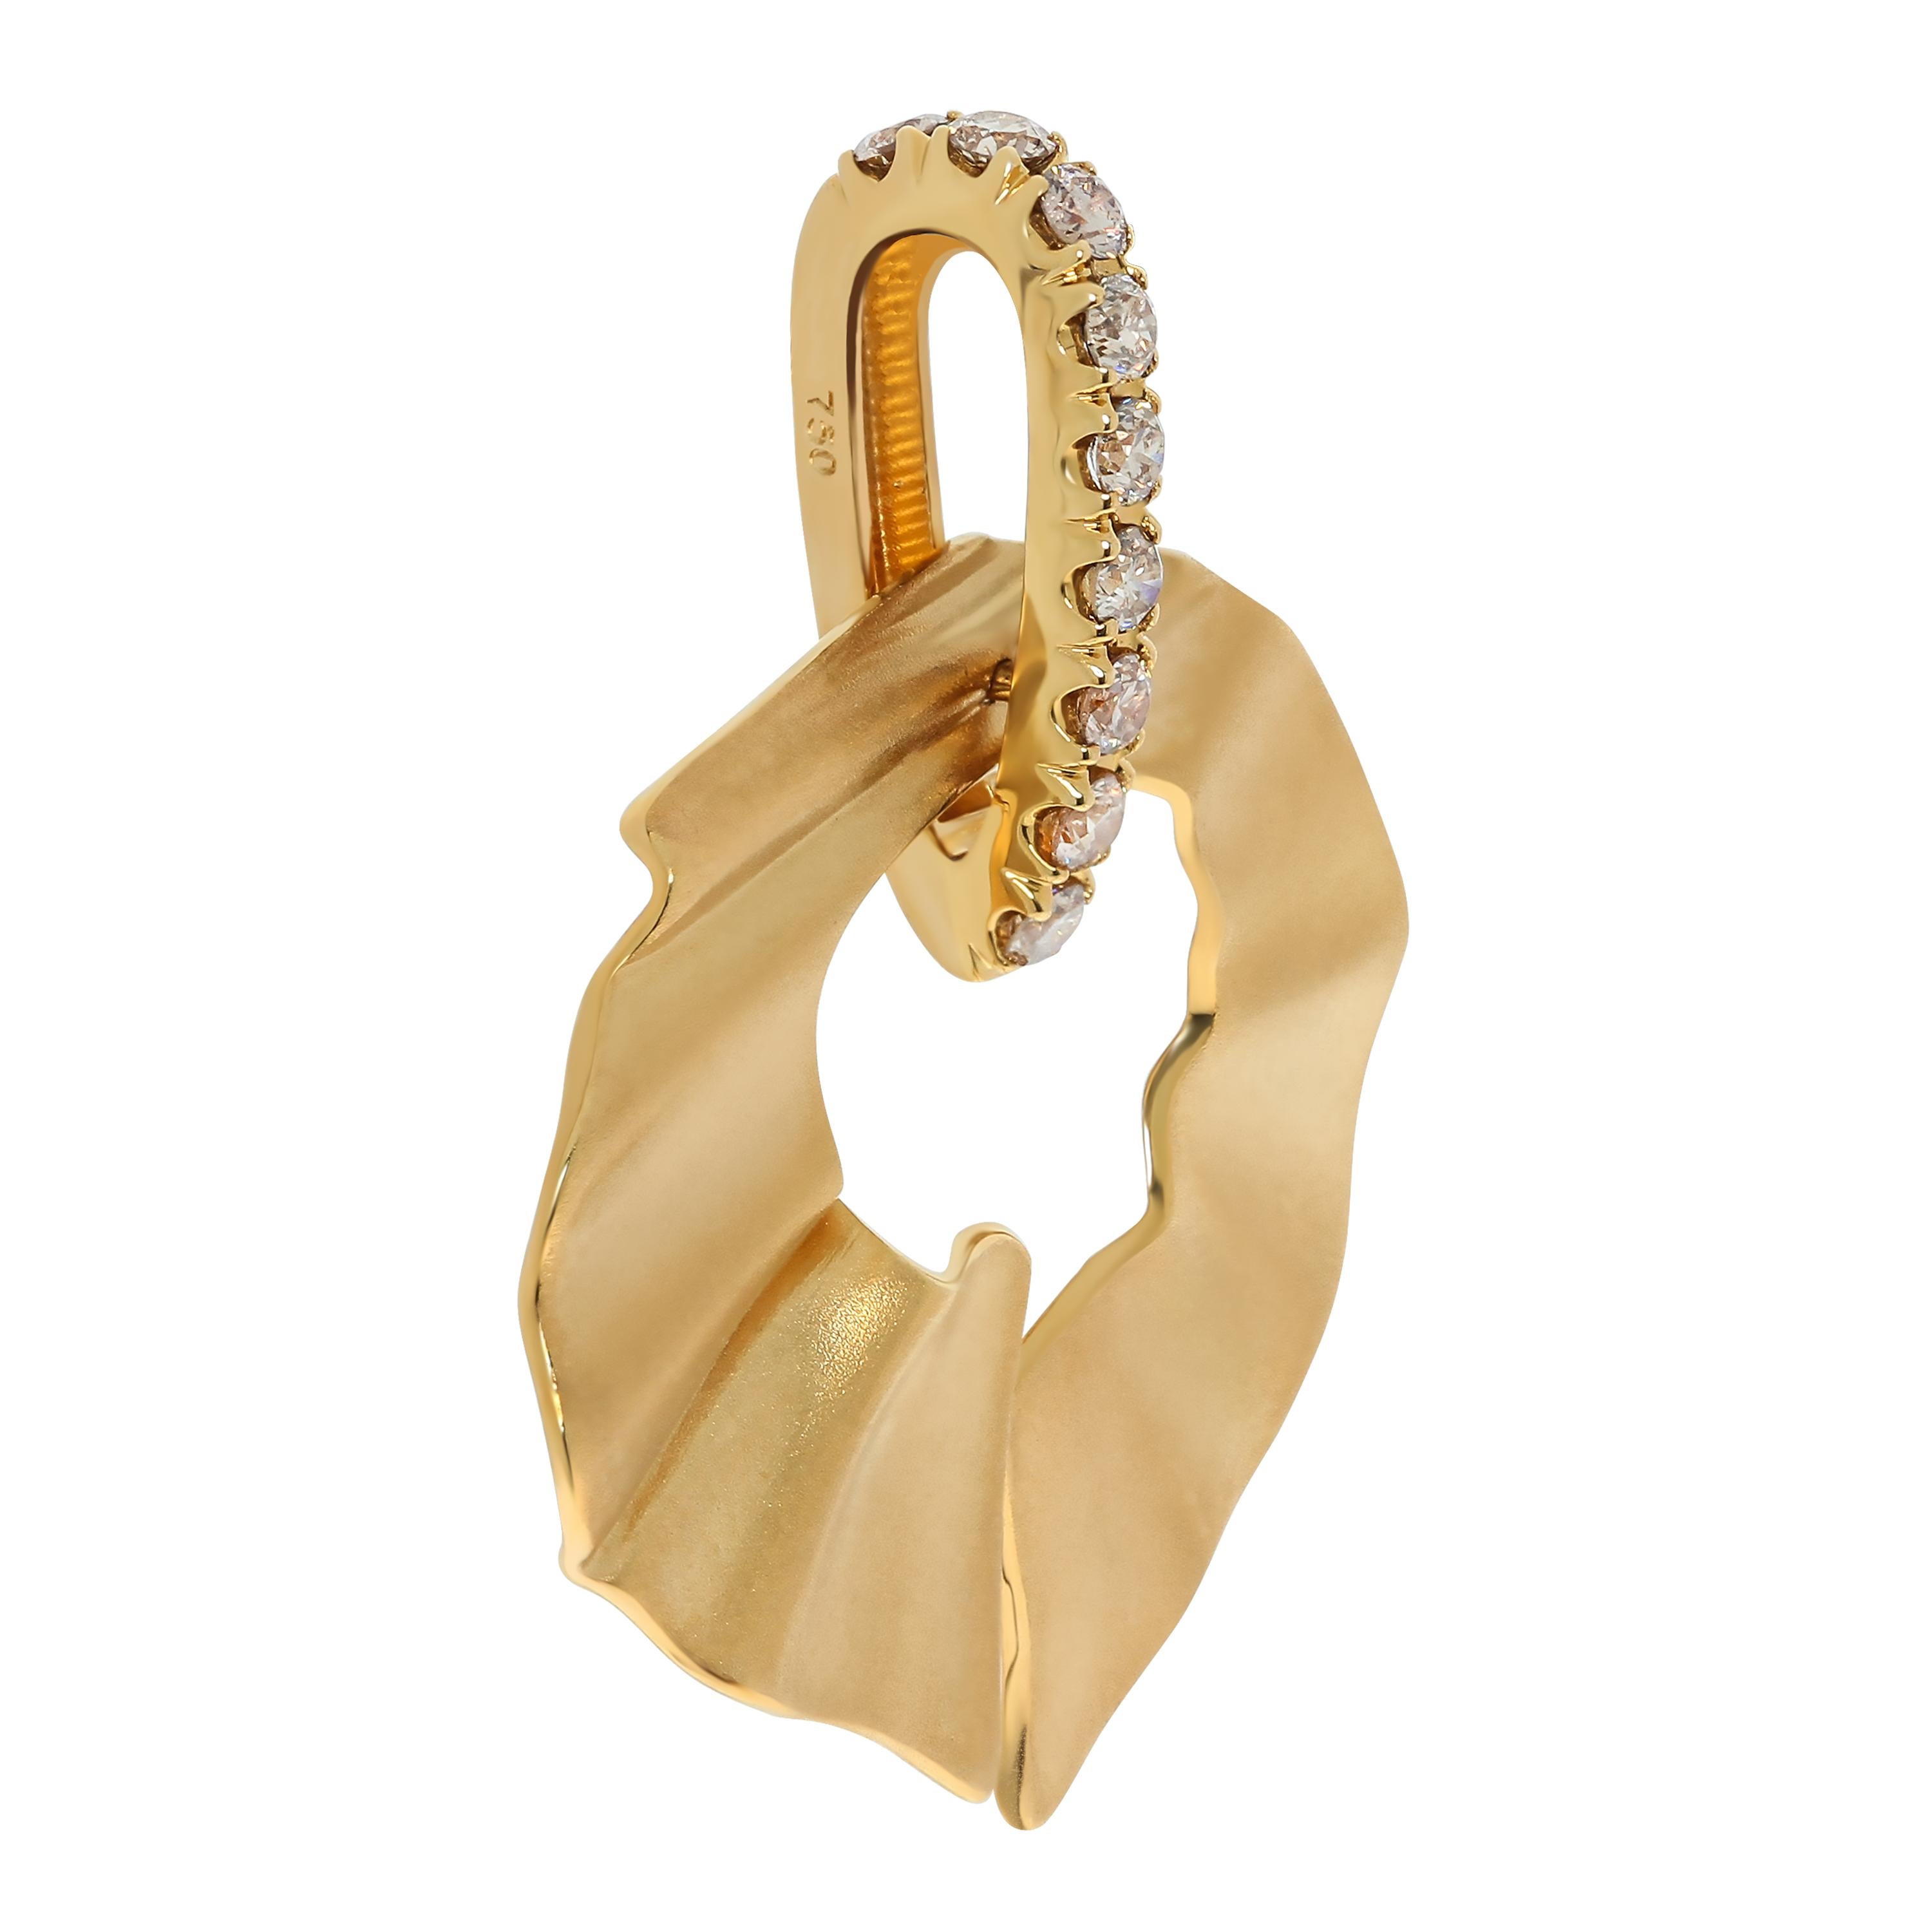 Champagne Diamonds 18 Karat Yellow Gold Pret-a-Porter Pendant
Pendants from Pret-a-Porter collection are the elegance of fabrics. This Pendant is made as if of silk, which is pretty crumpled under the pressure of shiny 9 Champagne Diamonds. 